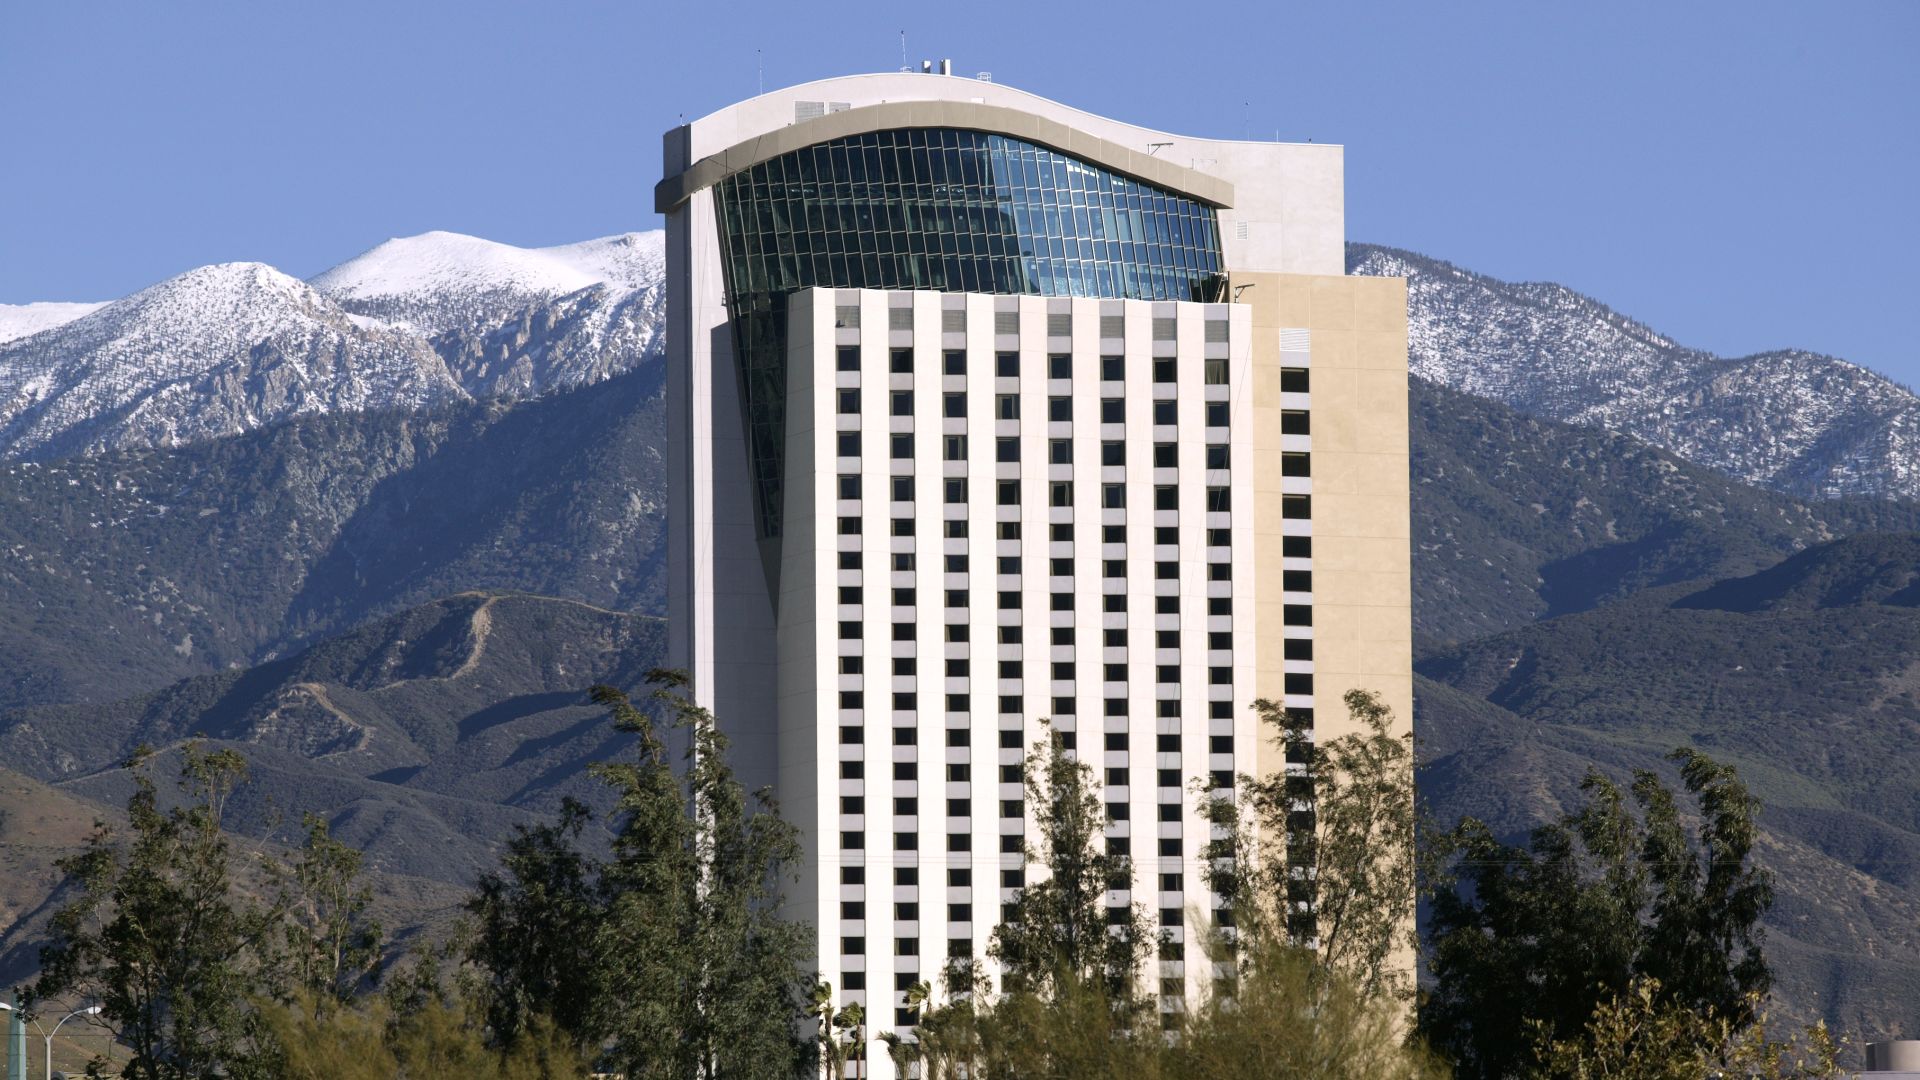 California Casino and Resort against the Mountains